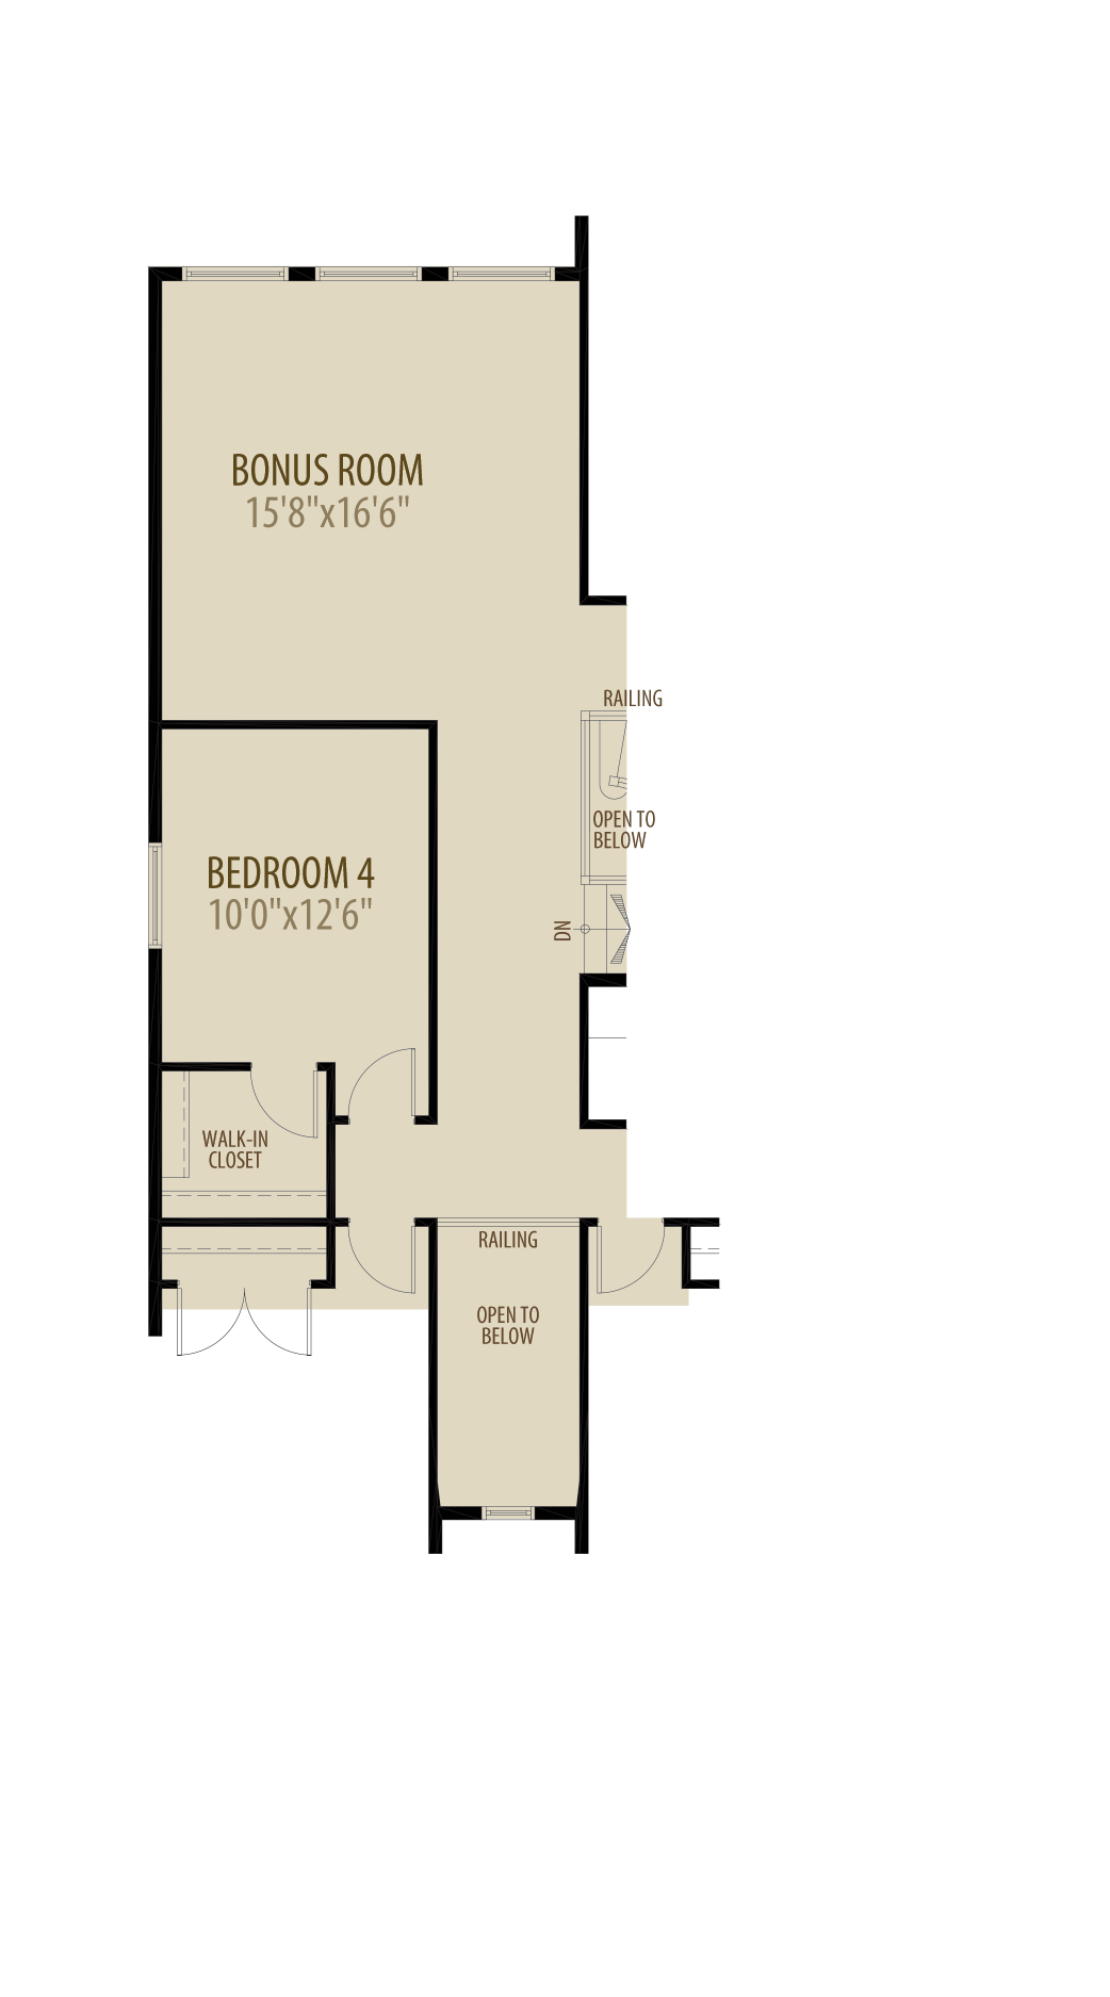 Option 4 4th Bedroom adds 218sq ft